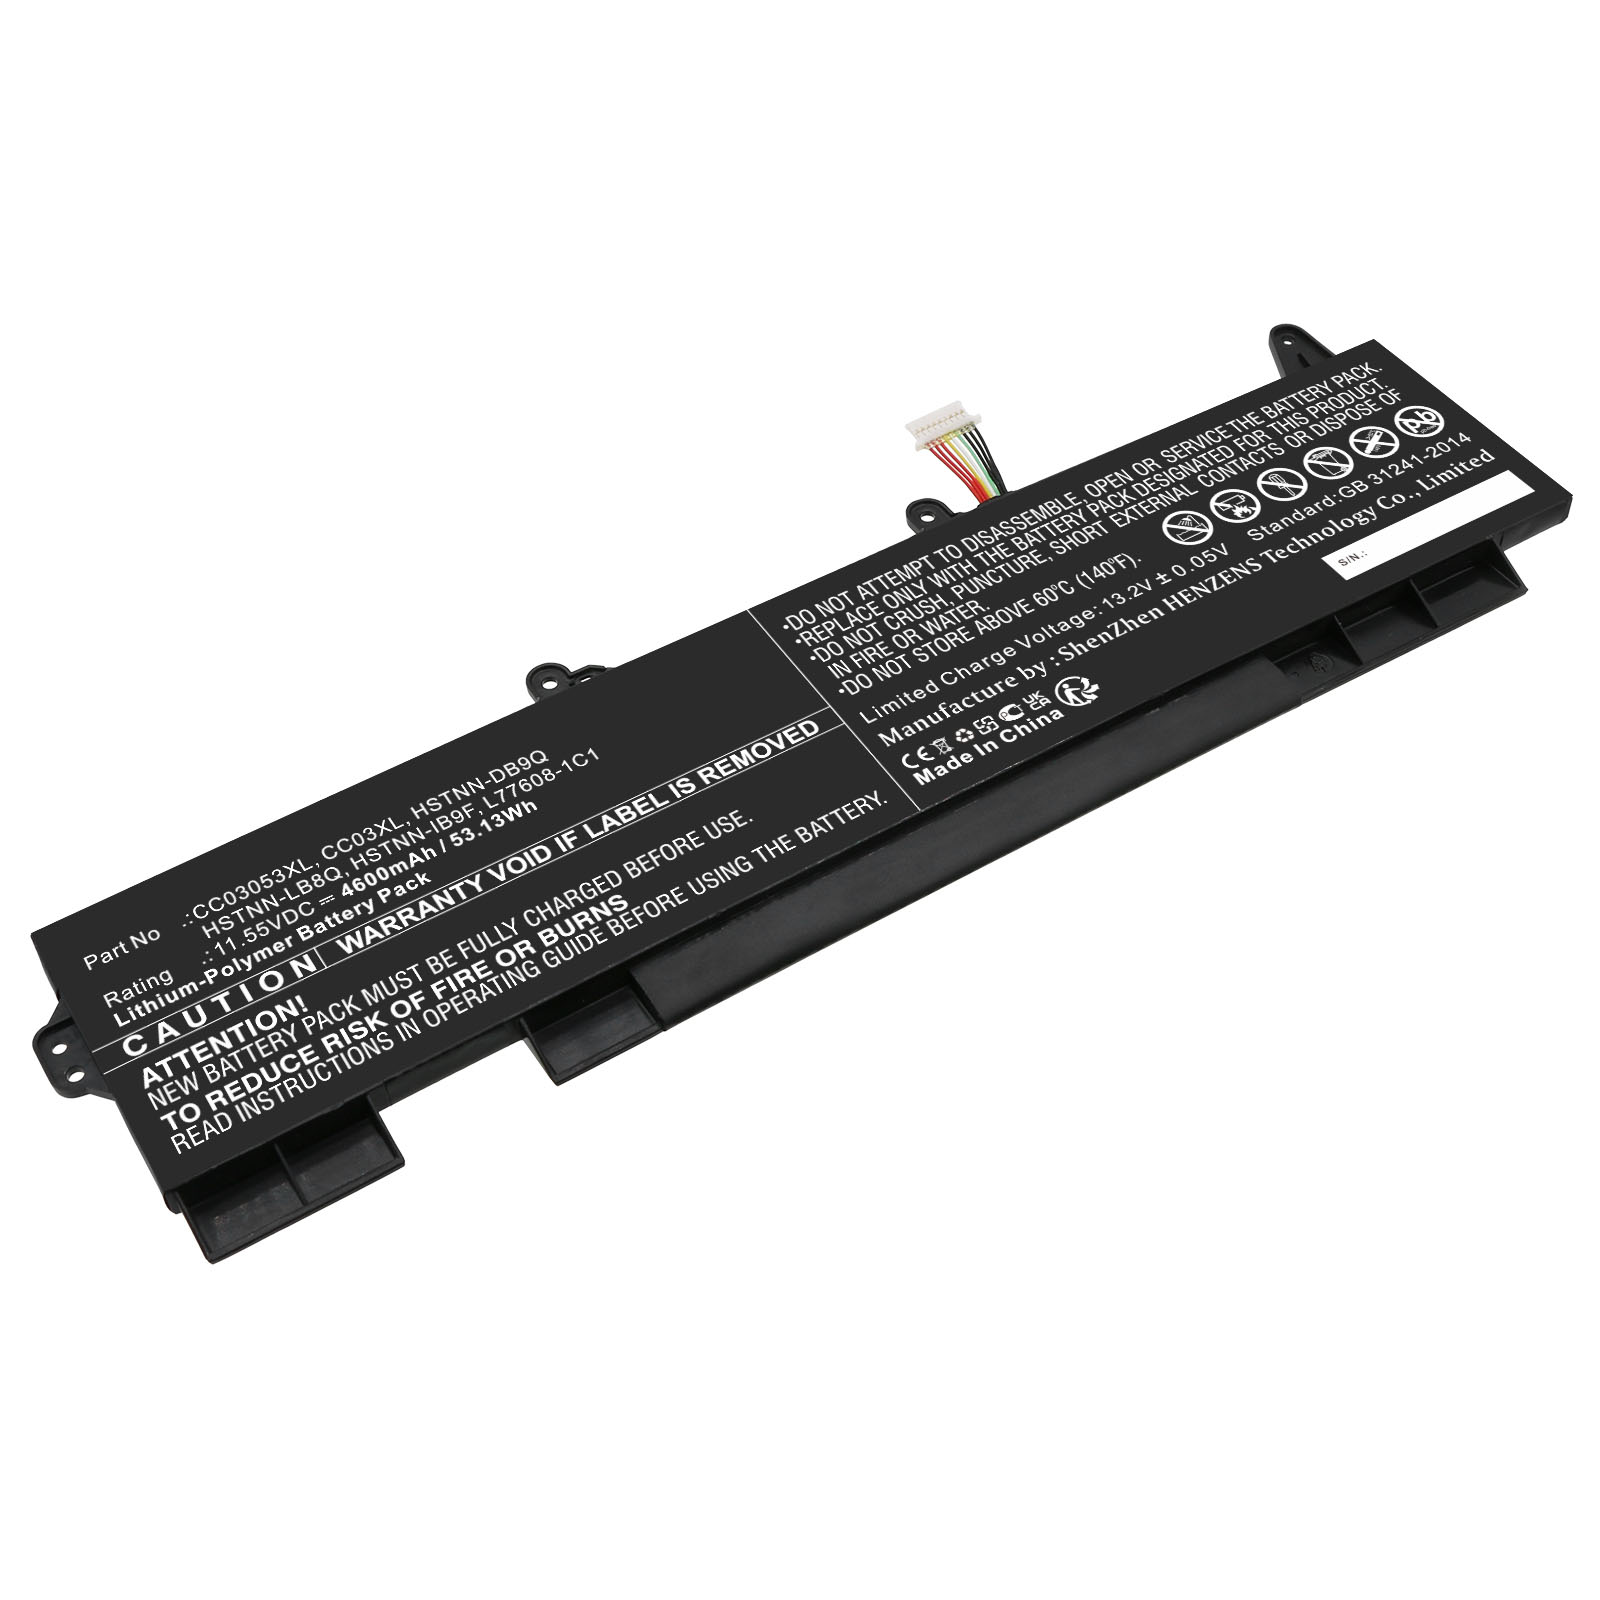 Synergy Digital Laptop Battery, Compatible with HP CC03053XL Laptop Battery (Li-ion, 11.55V, 4600mAh)